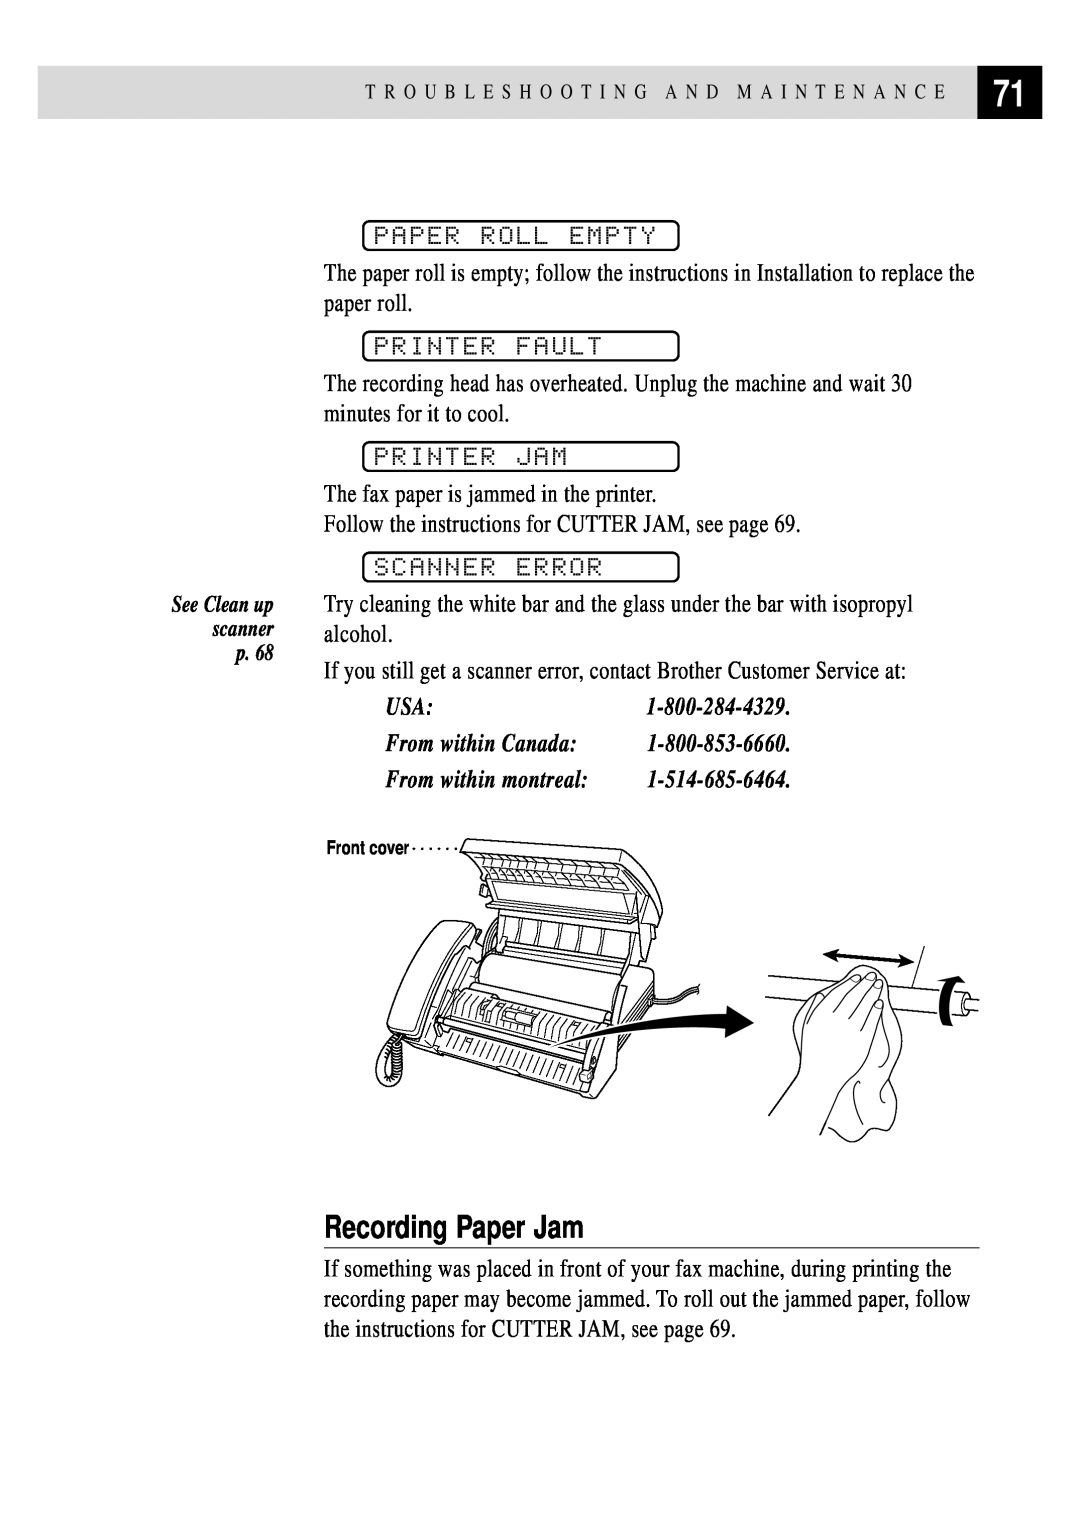 Brother FAX 255 Recording Paper Jam, Paper Roll Empty, Printer Fault, Printer Jam, Scanner Error, From within Canada 